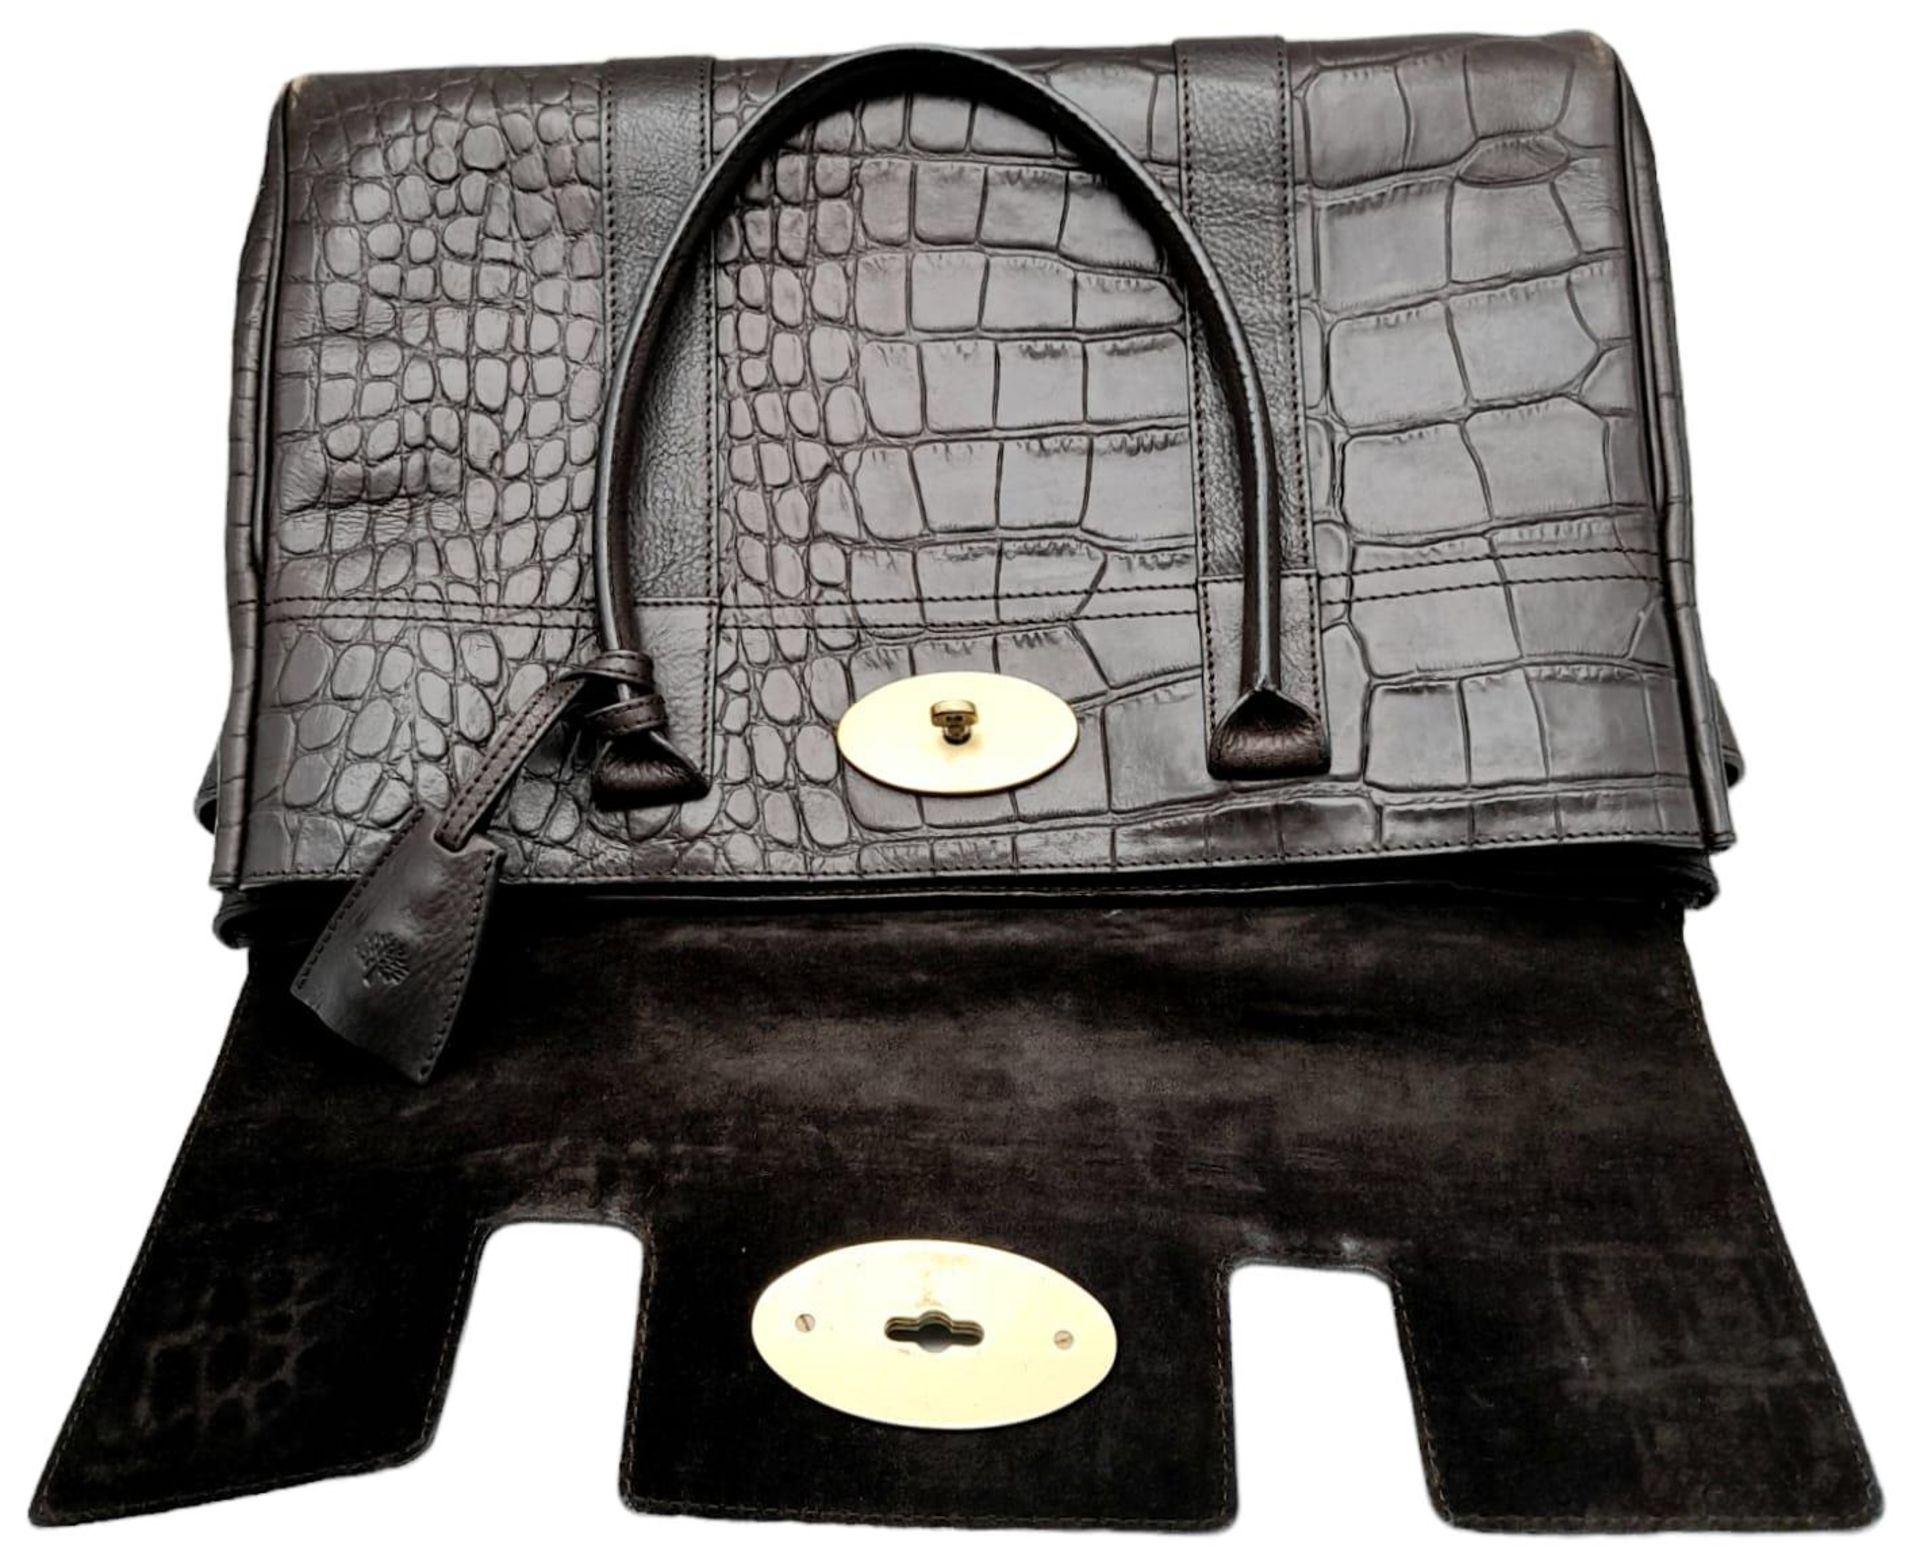 A Mulberry Chocolate 'Bayswater' Handbag. Croc embossed leather exterior with gold-toned hardware, - Image 7 of 12